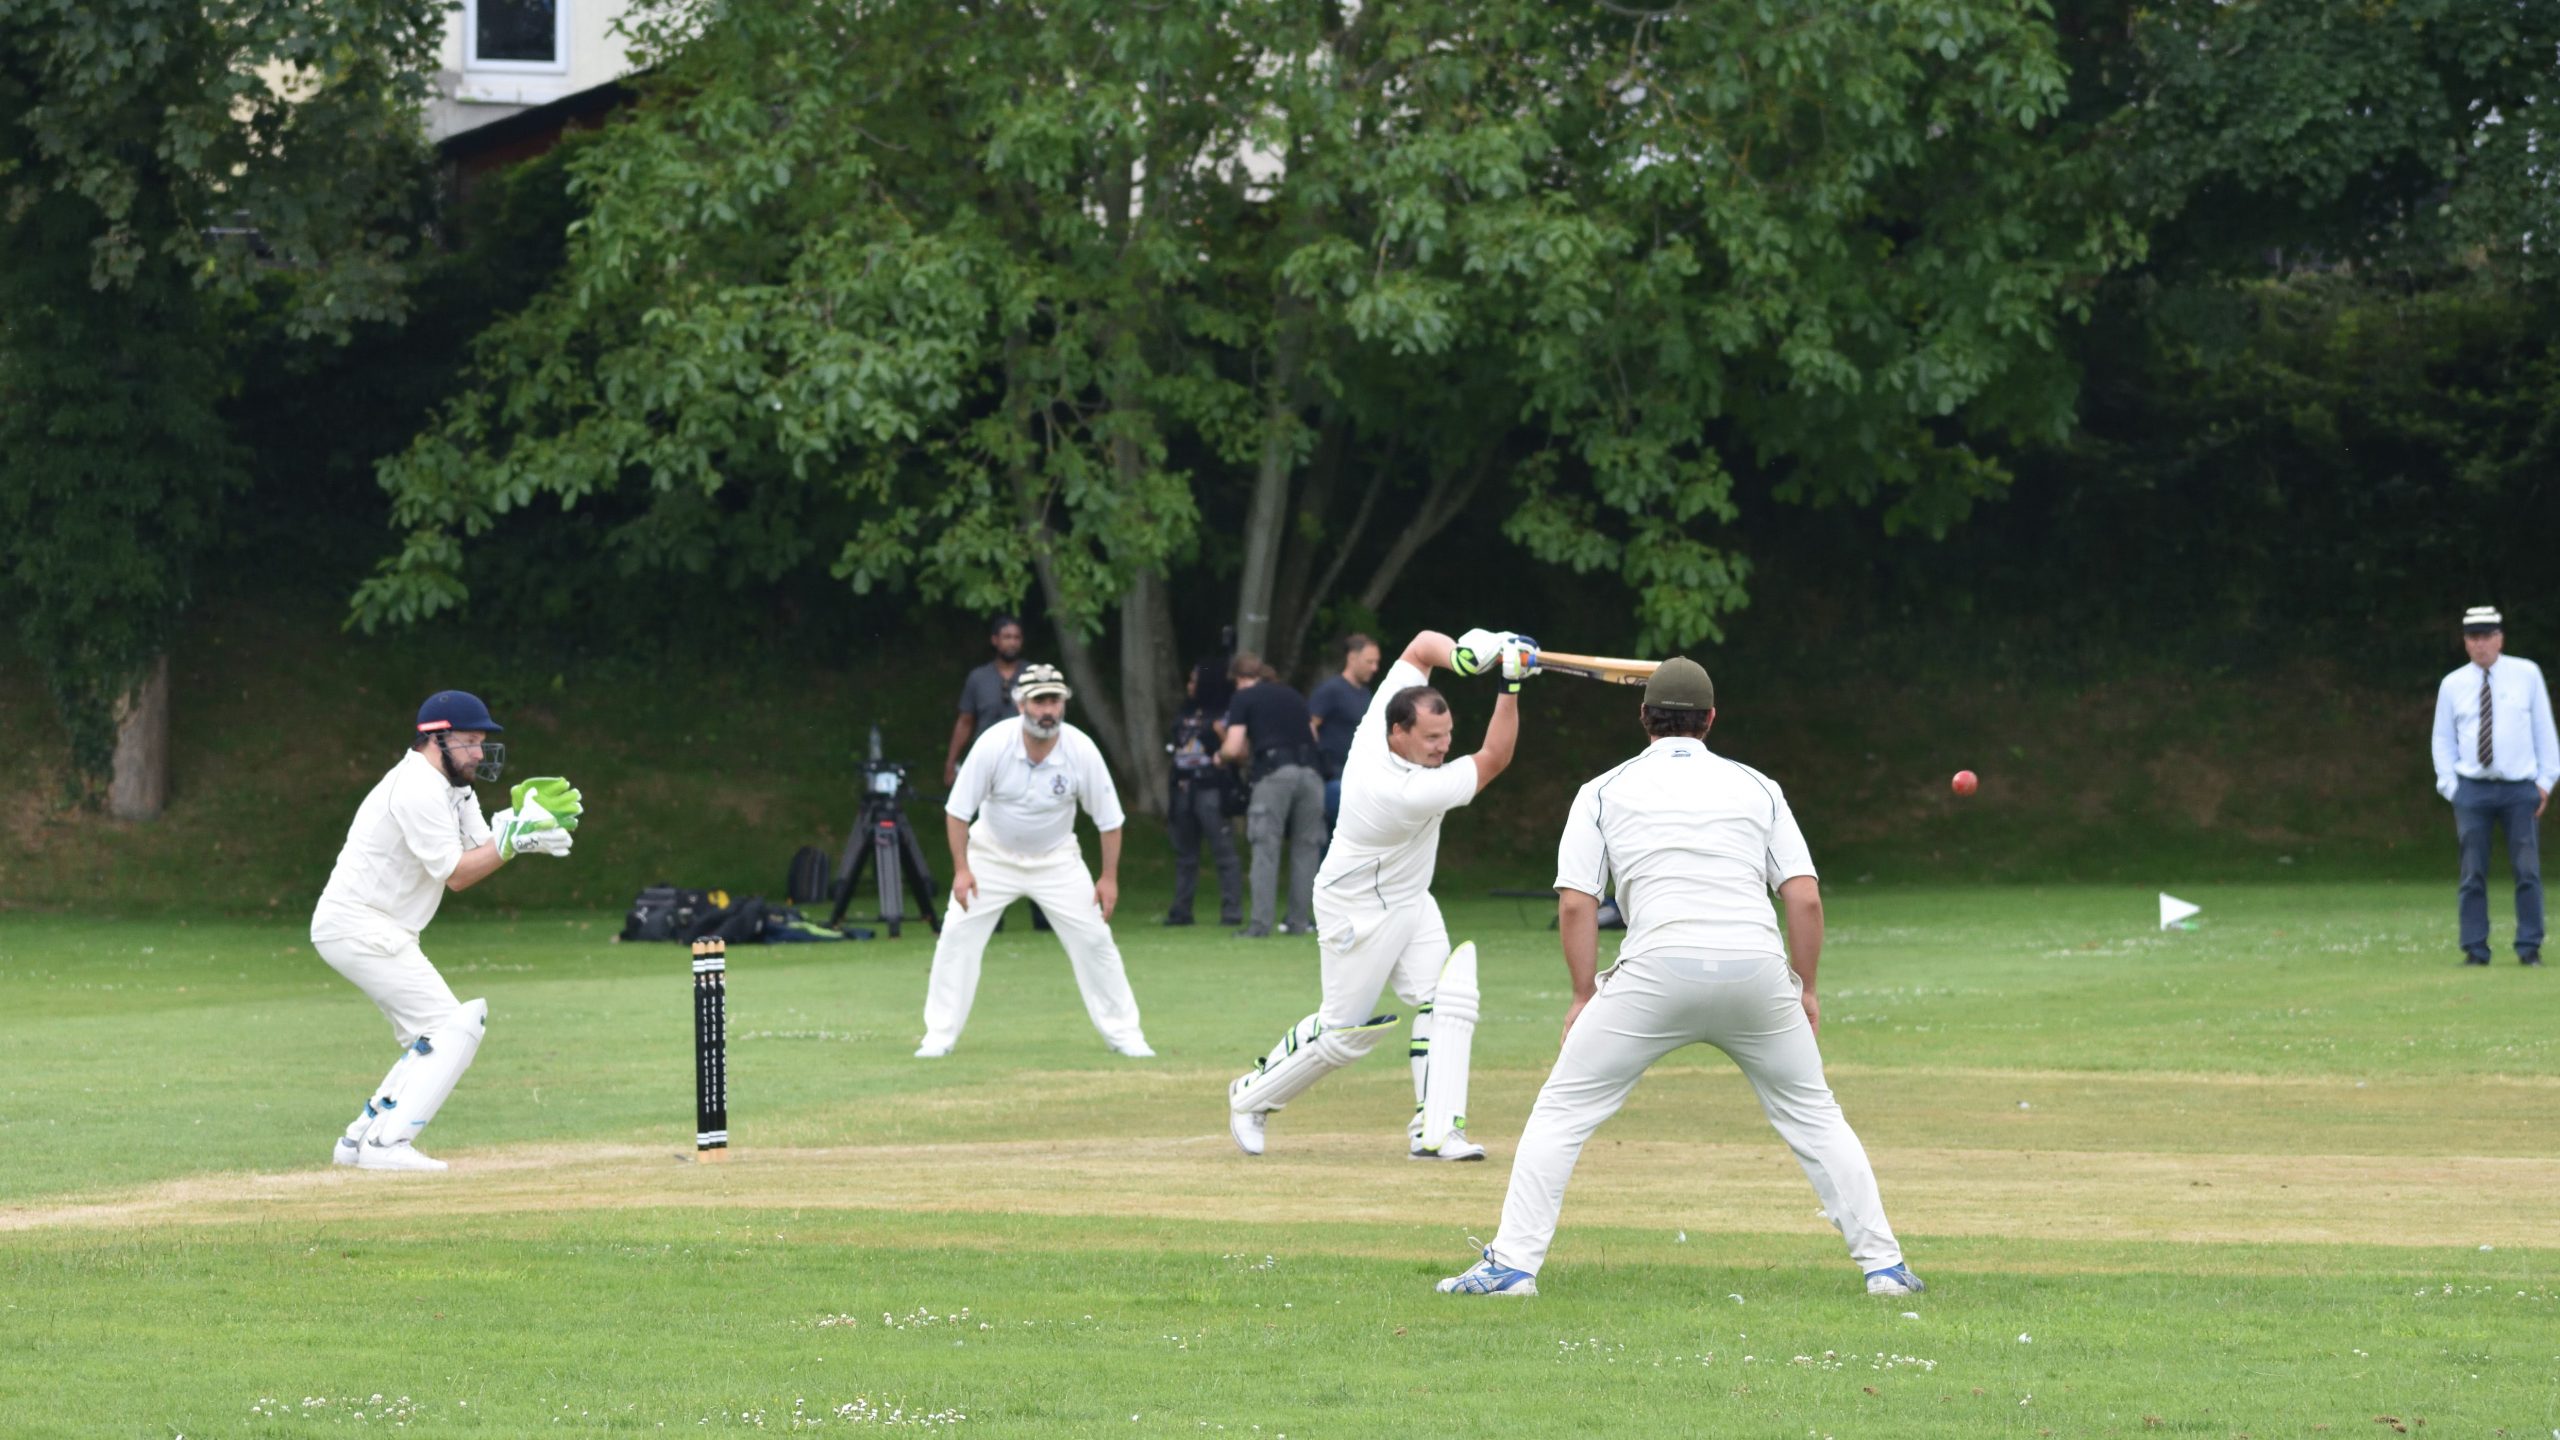 Old Dovorian Club AGM and Cricket Match Sunday 4th June 2022